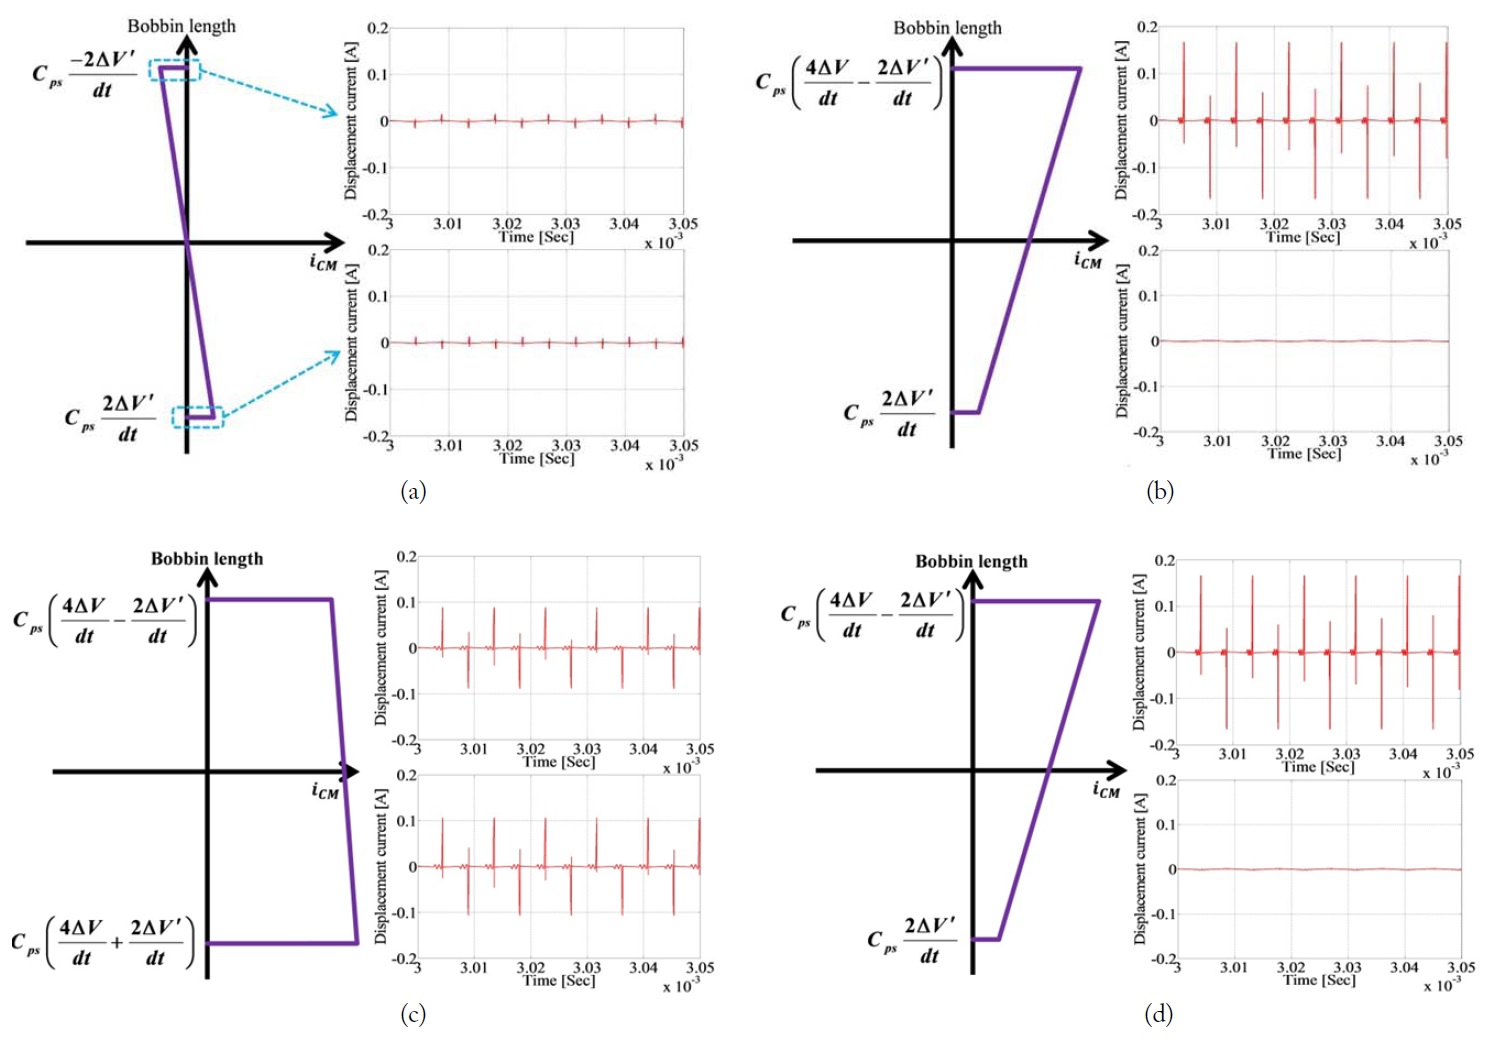 Comparison between the analysis and simulation results of the displacement currents on the noisy and quiet nodes. (a) Quiet node and antipolarity connection. (b) Quiet node and same-polarity connection. (c) Noisy node and anti-polarity connection. (d) Noisy node and samepolarity connection.